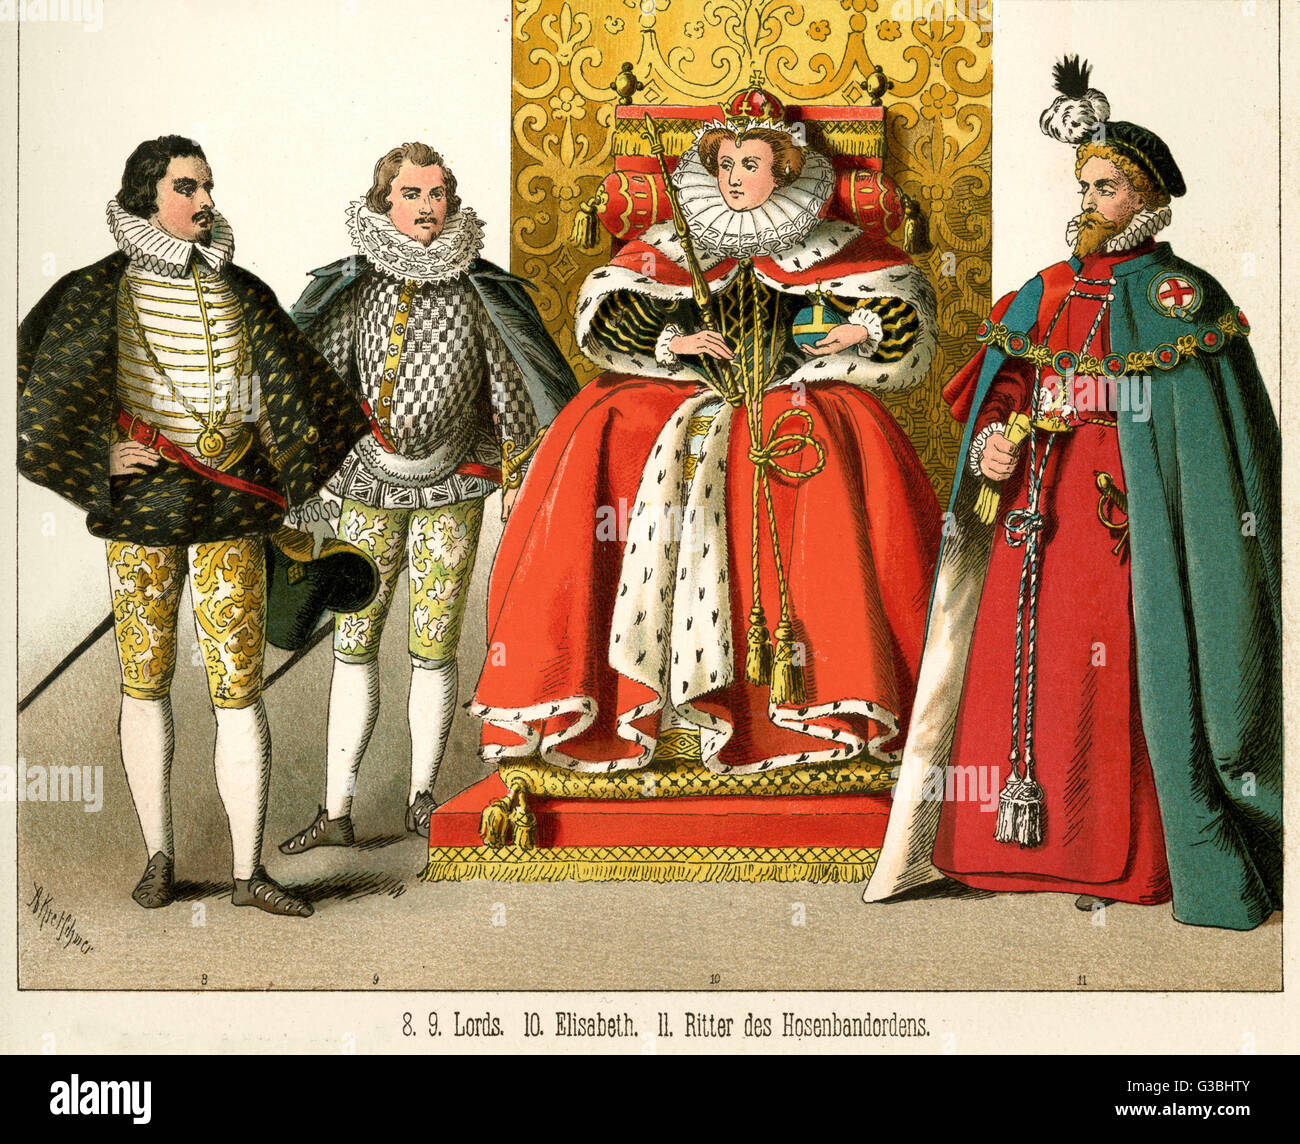 Nobleman &amp; Knight of the Order  of the Garter at the court of  Queen Elizabeth I. N.B trunk- hose, canions, peascod-bellied  doublets, ruffs, cloaks,  copotain hat, gowns, flat cap     Date: circa 1590 Stock Photo